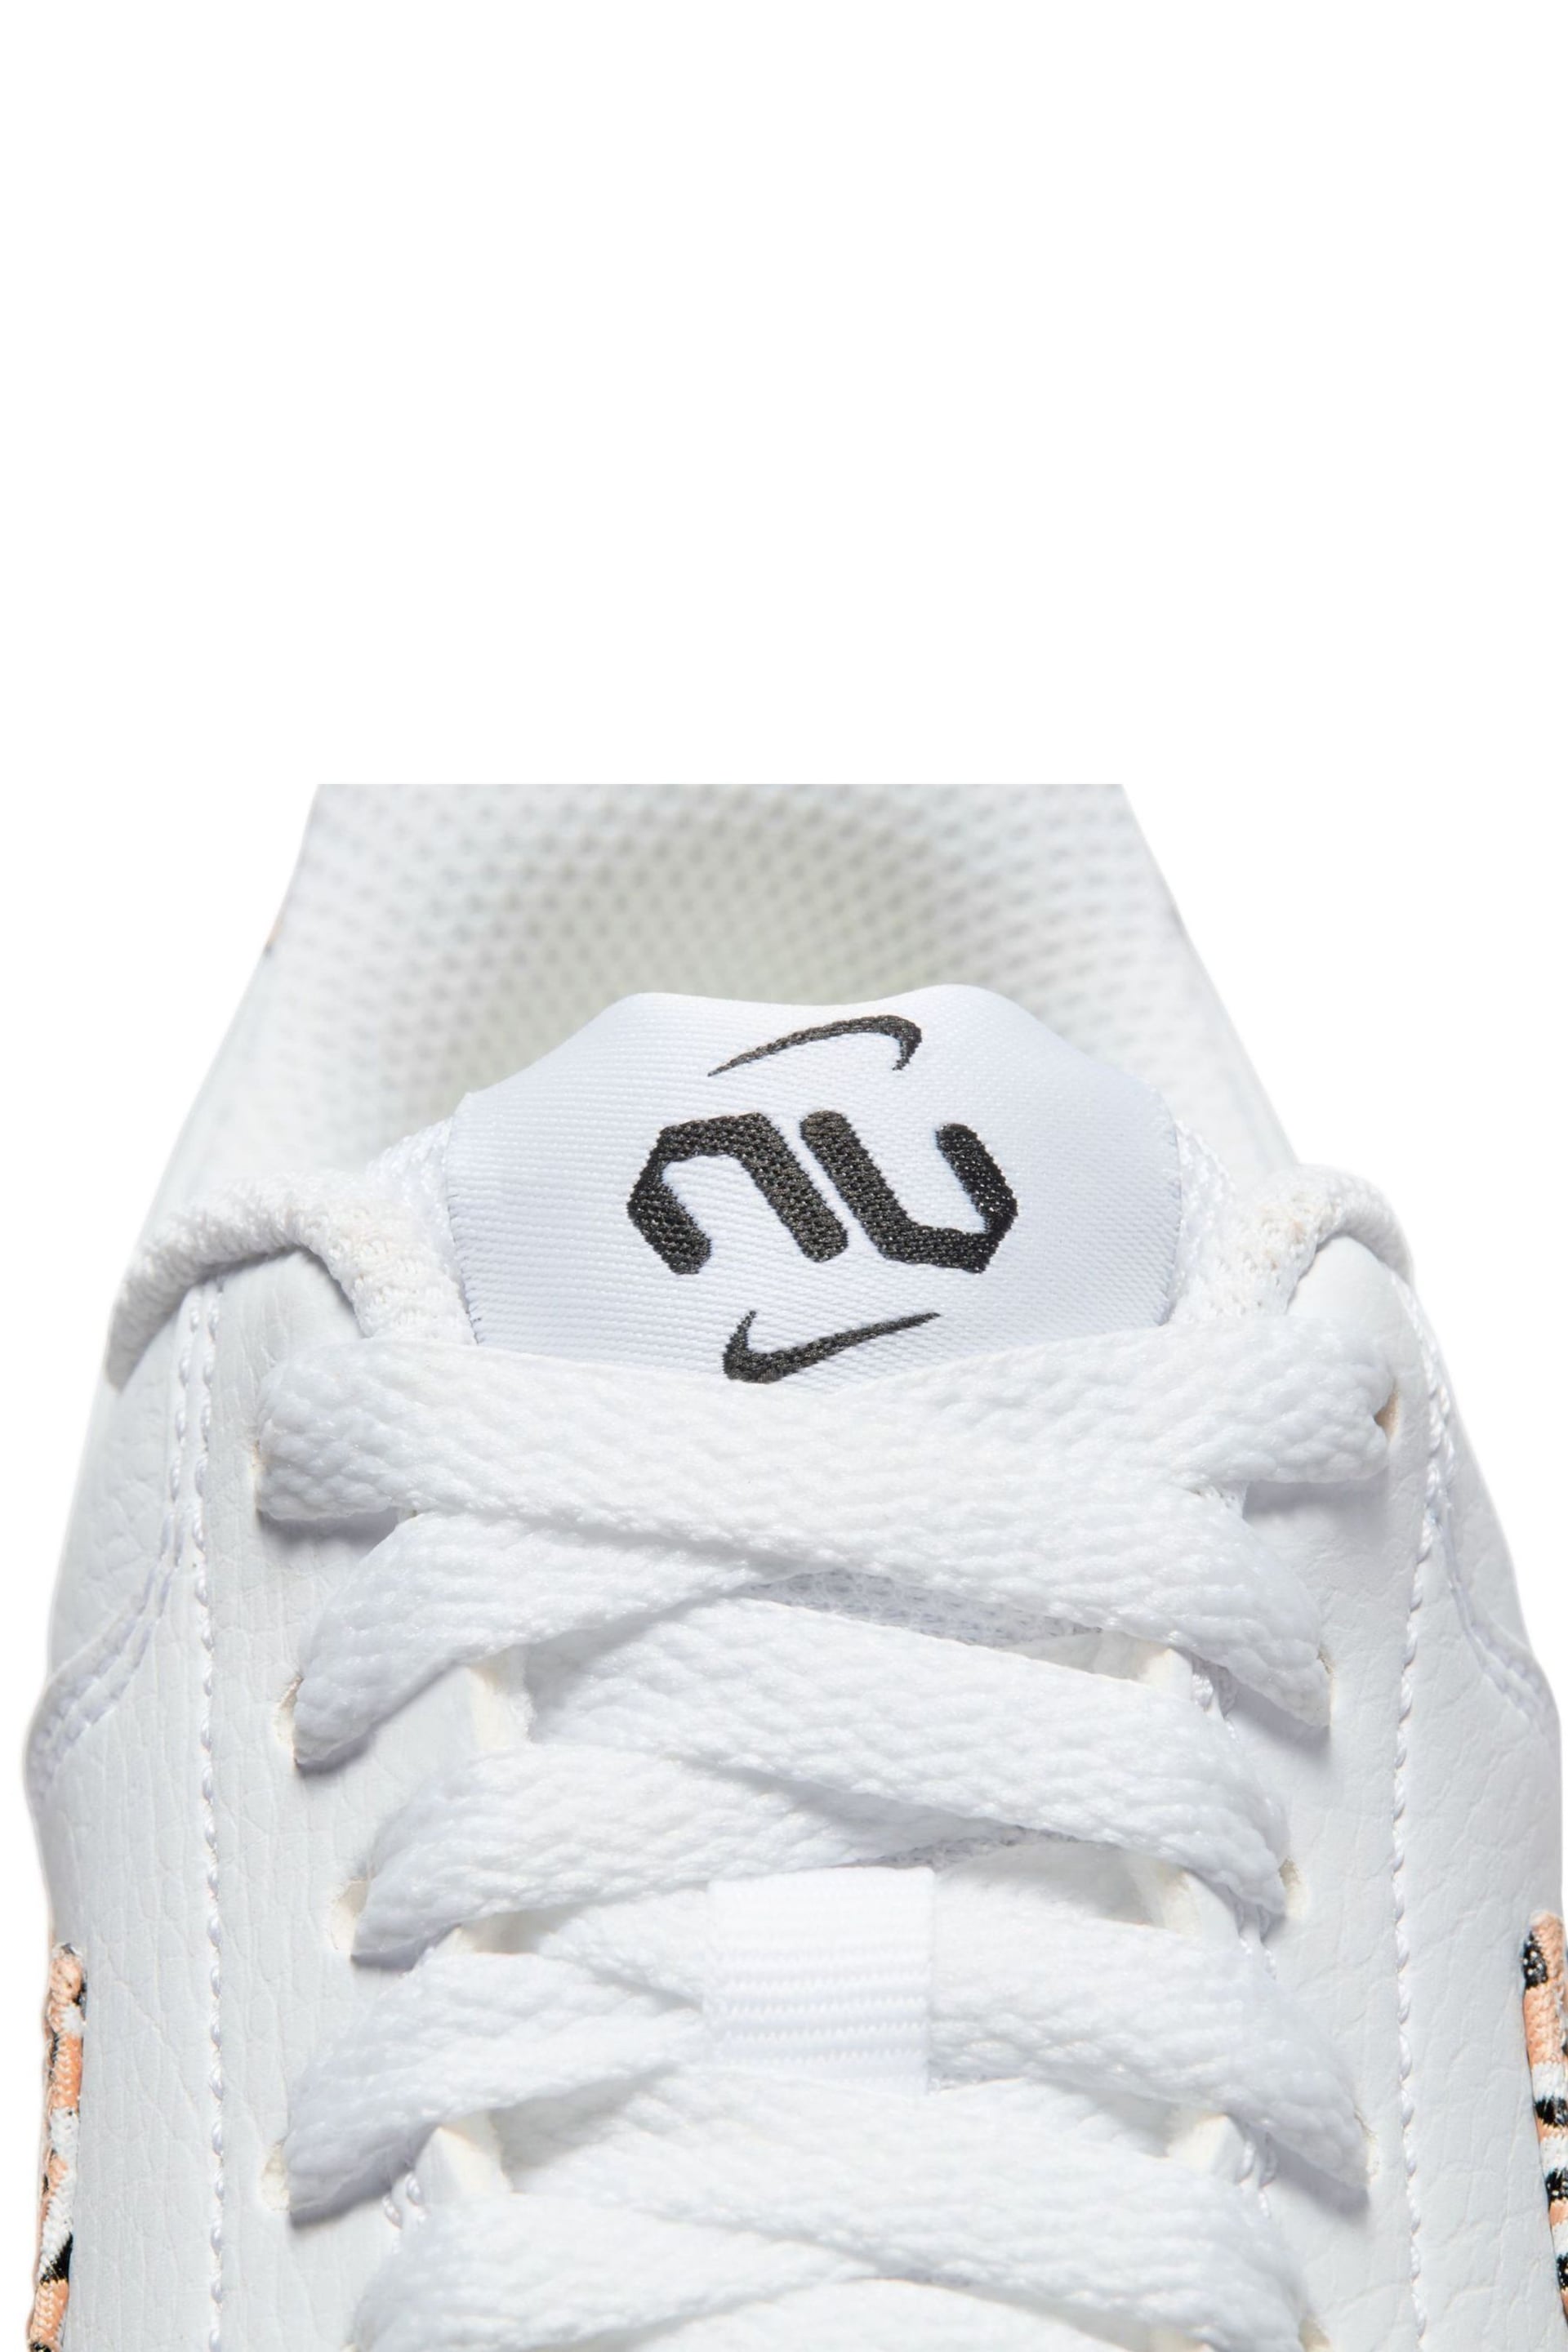 Nike White Court Vision Low Trainers United in Victory - Image 12 of 12